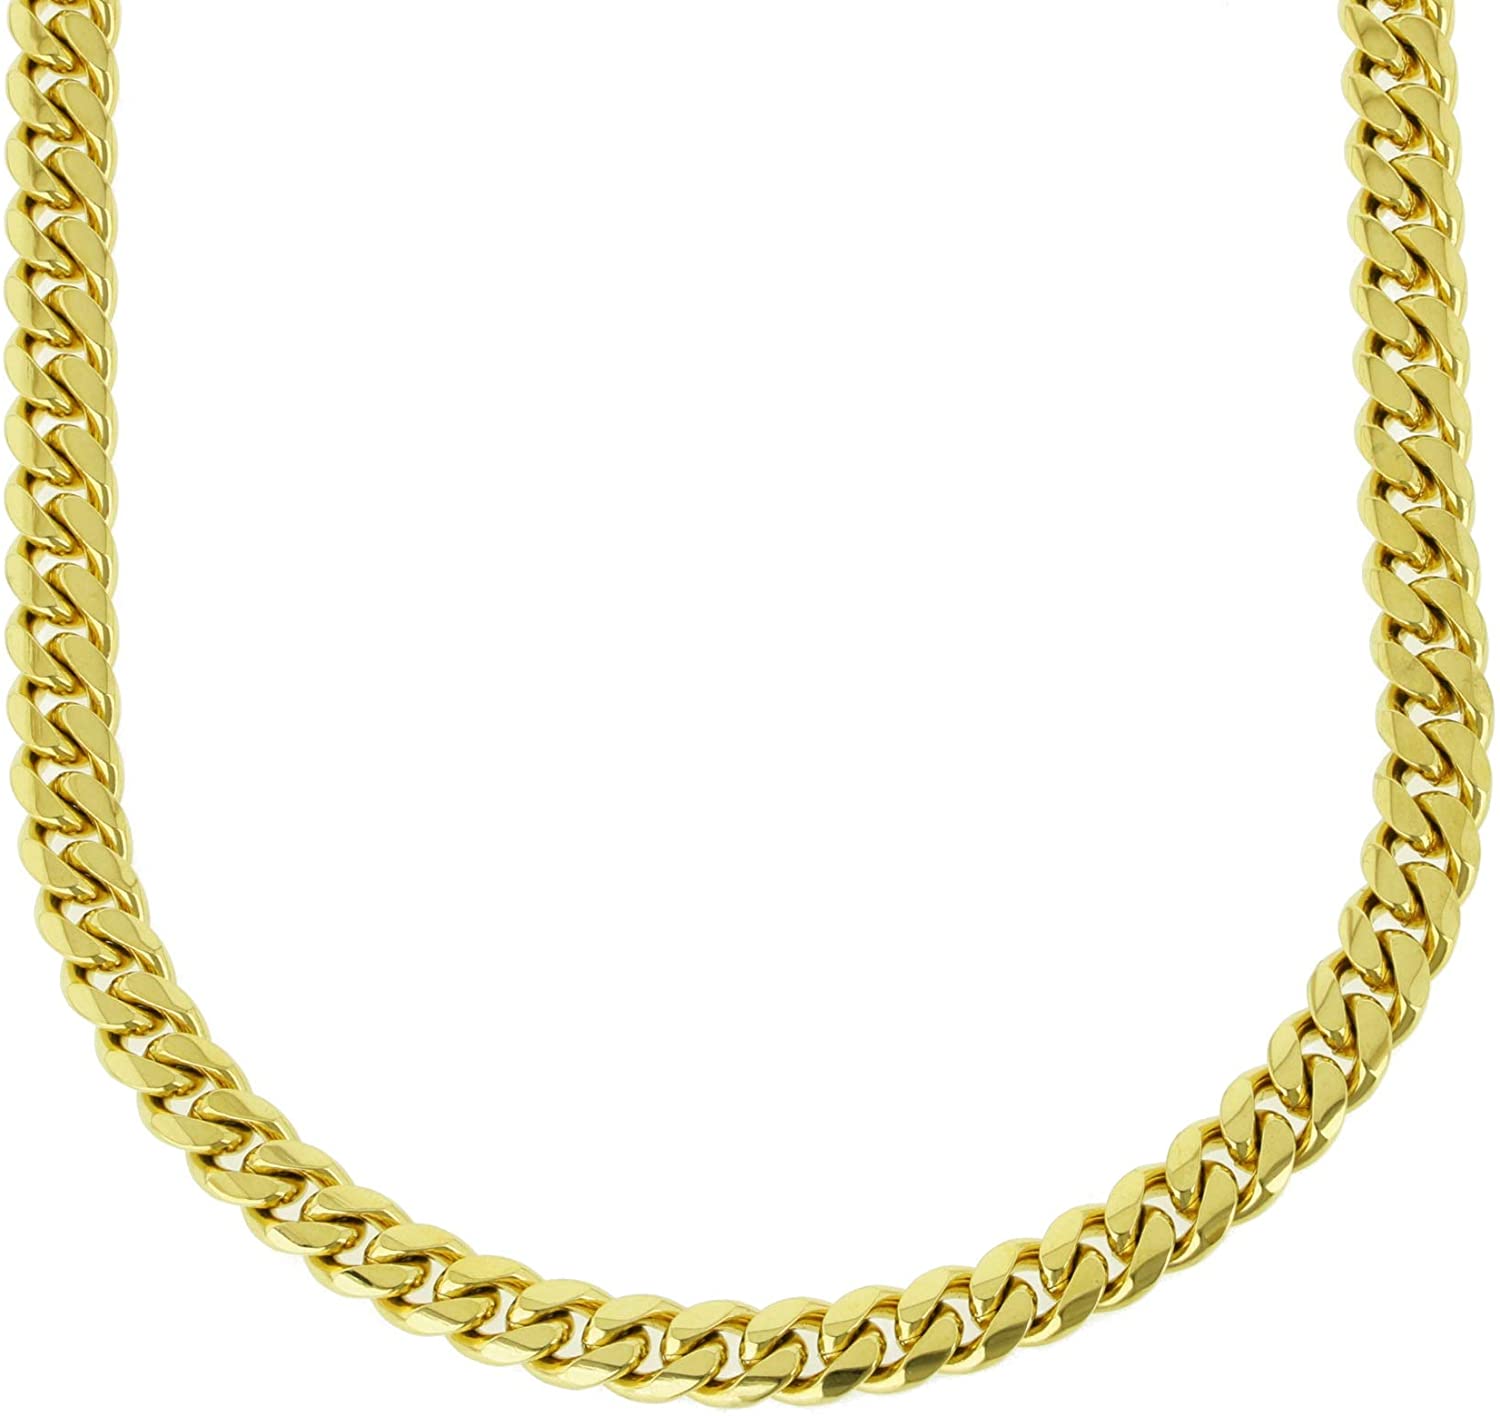 18k Gold Plated 316L Stainless Steel Cuban Chain - 10mm